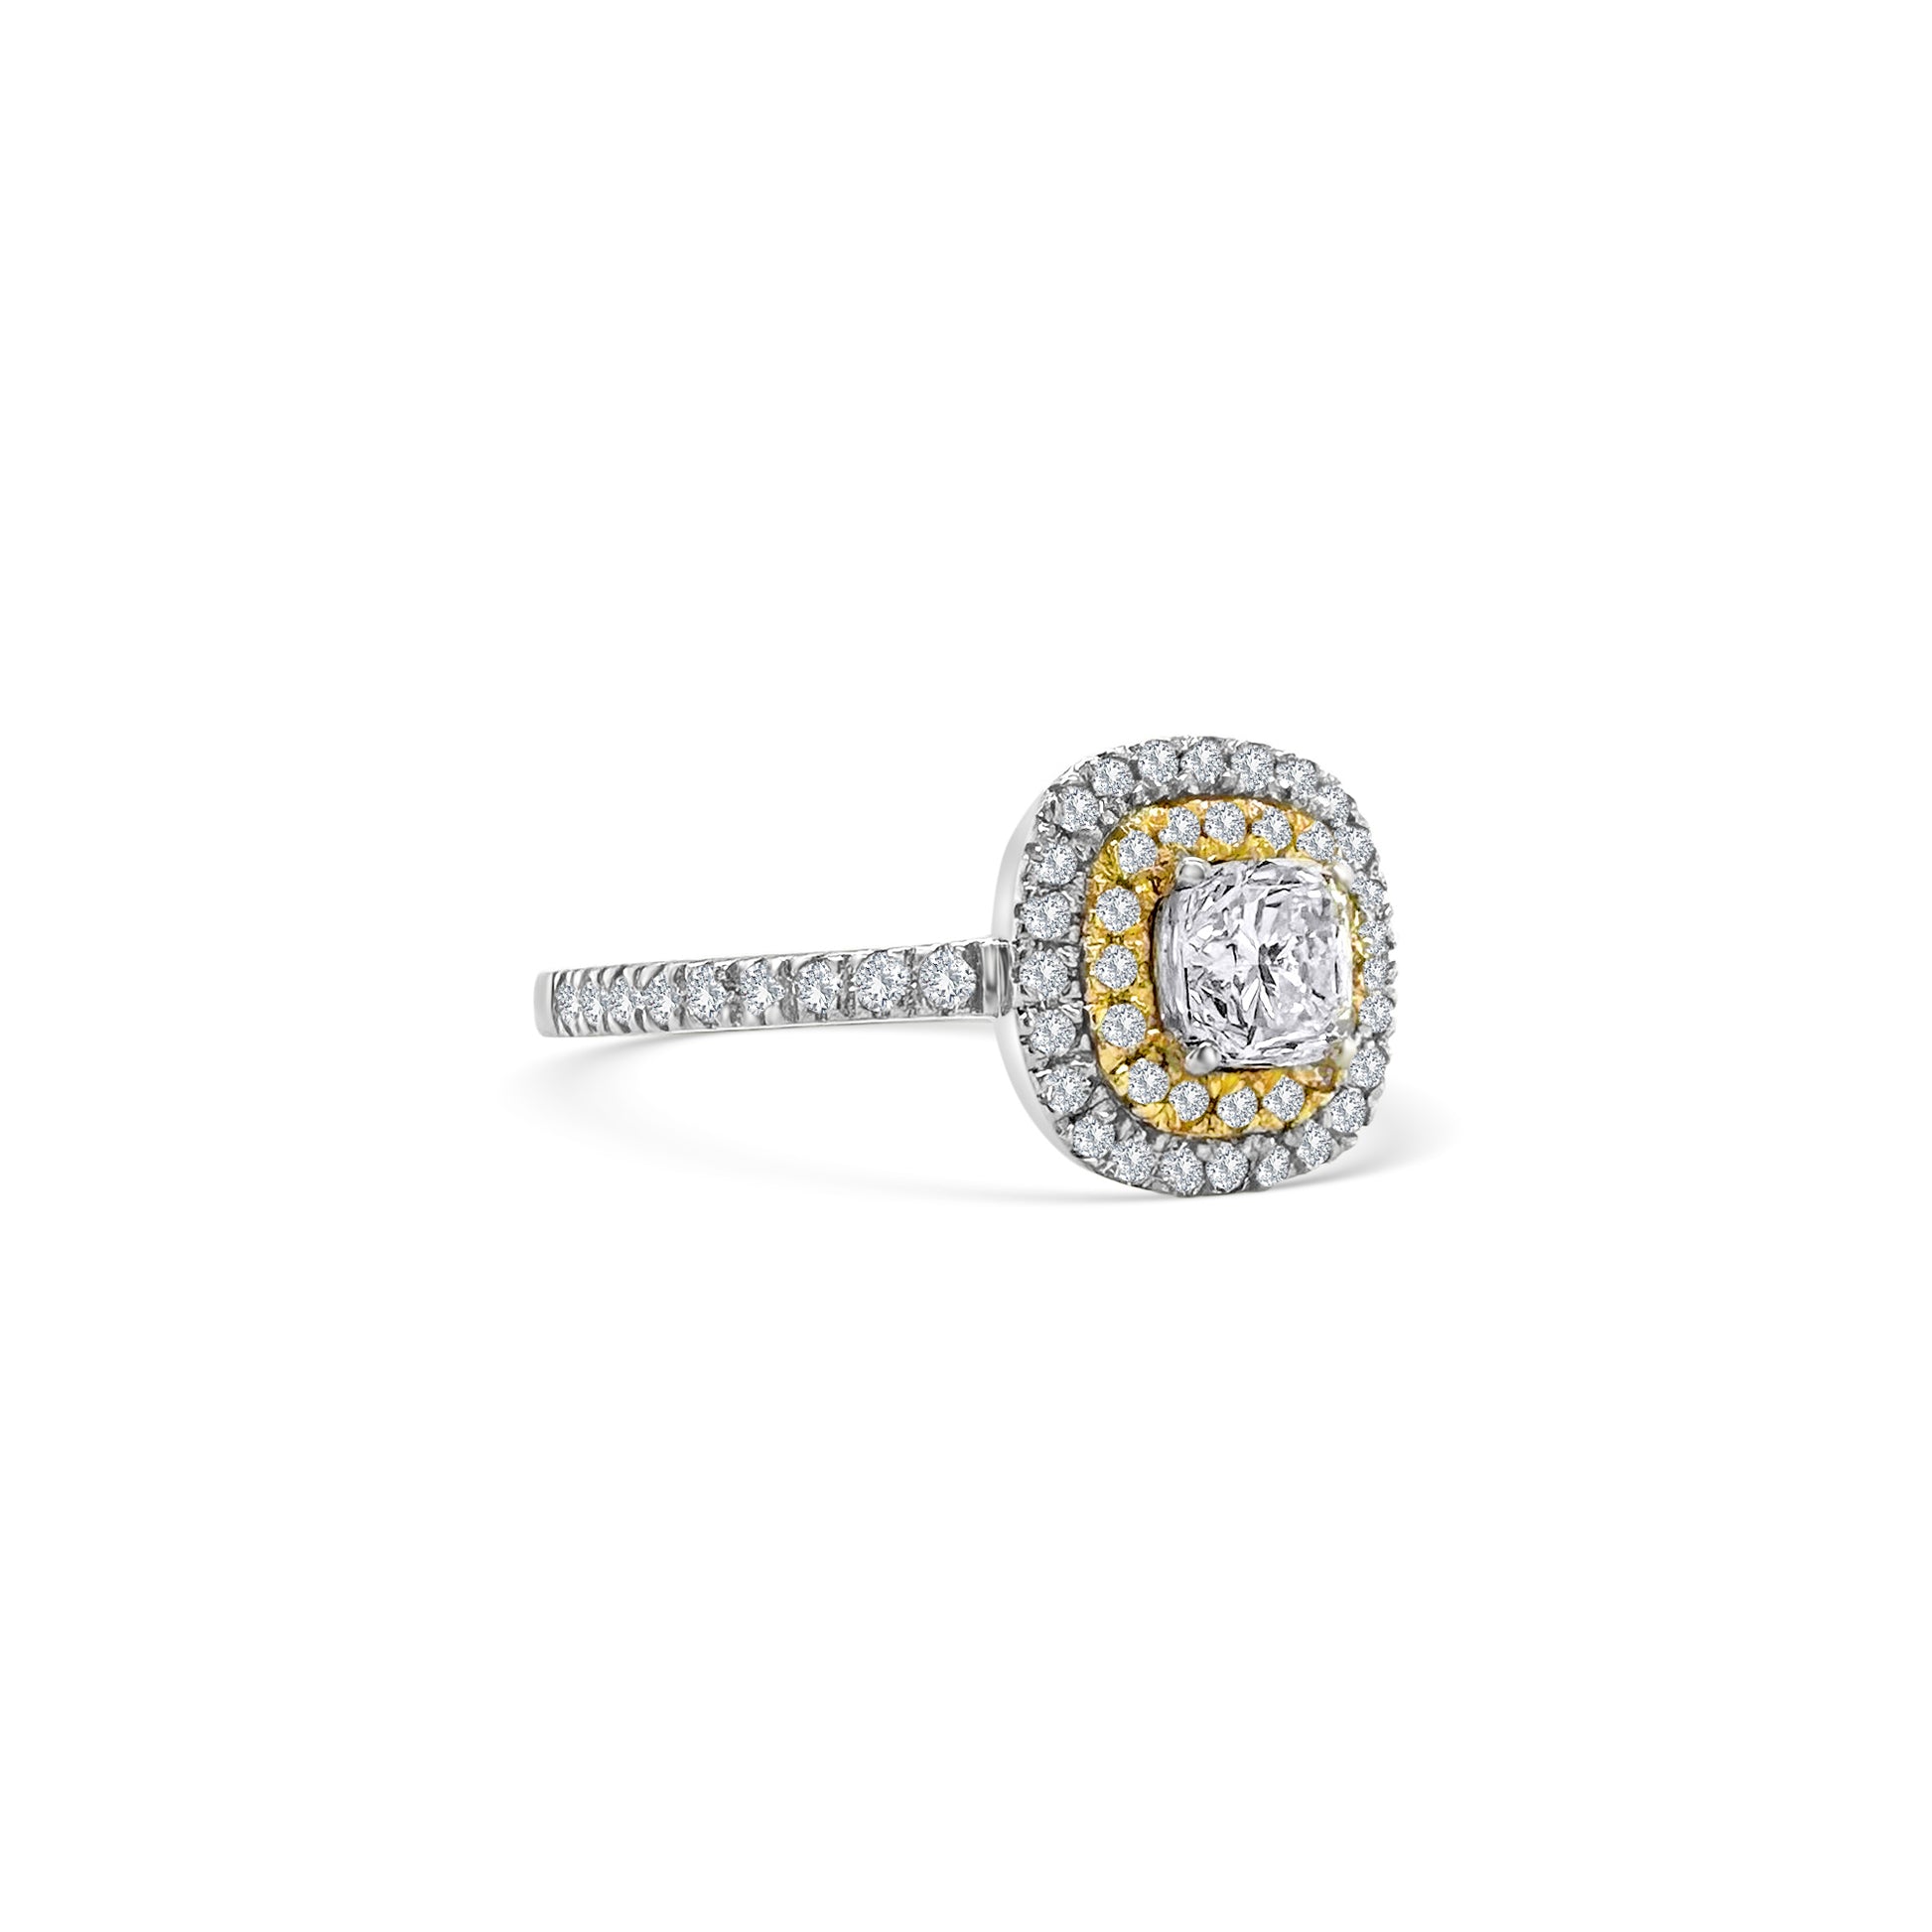 A stunning cushion-cut diamond ring, featuring a double halo design, crafted to perfection, ideal for special occasions, showcasing timeless elegance, with brilliant sparkle, making a statement, symbolizing everlasting love.